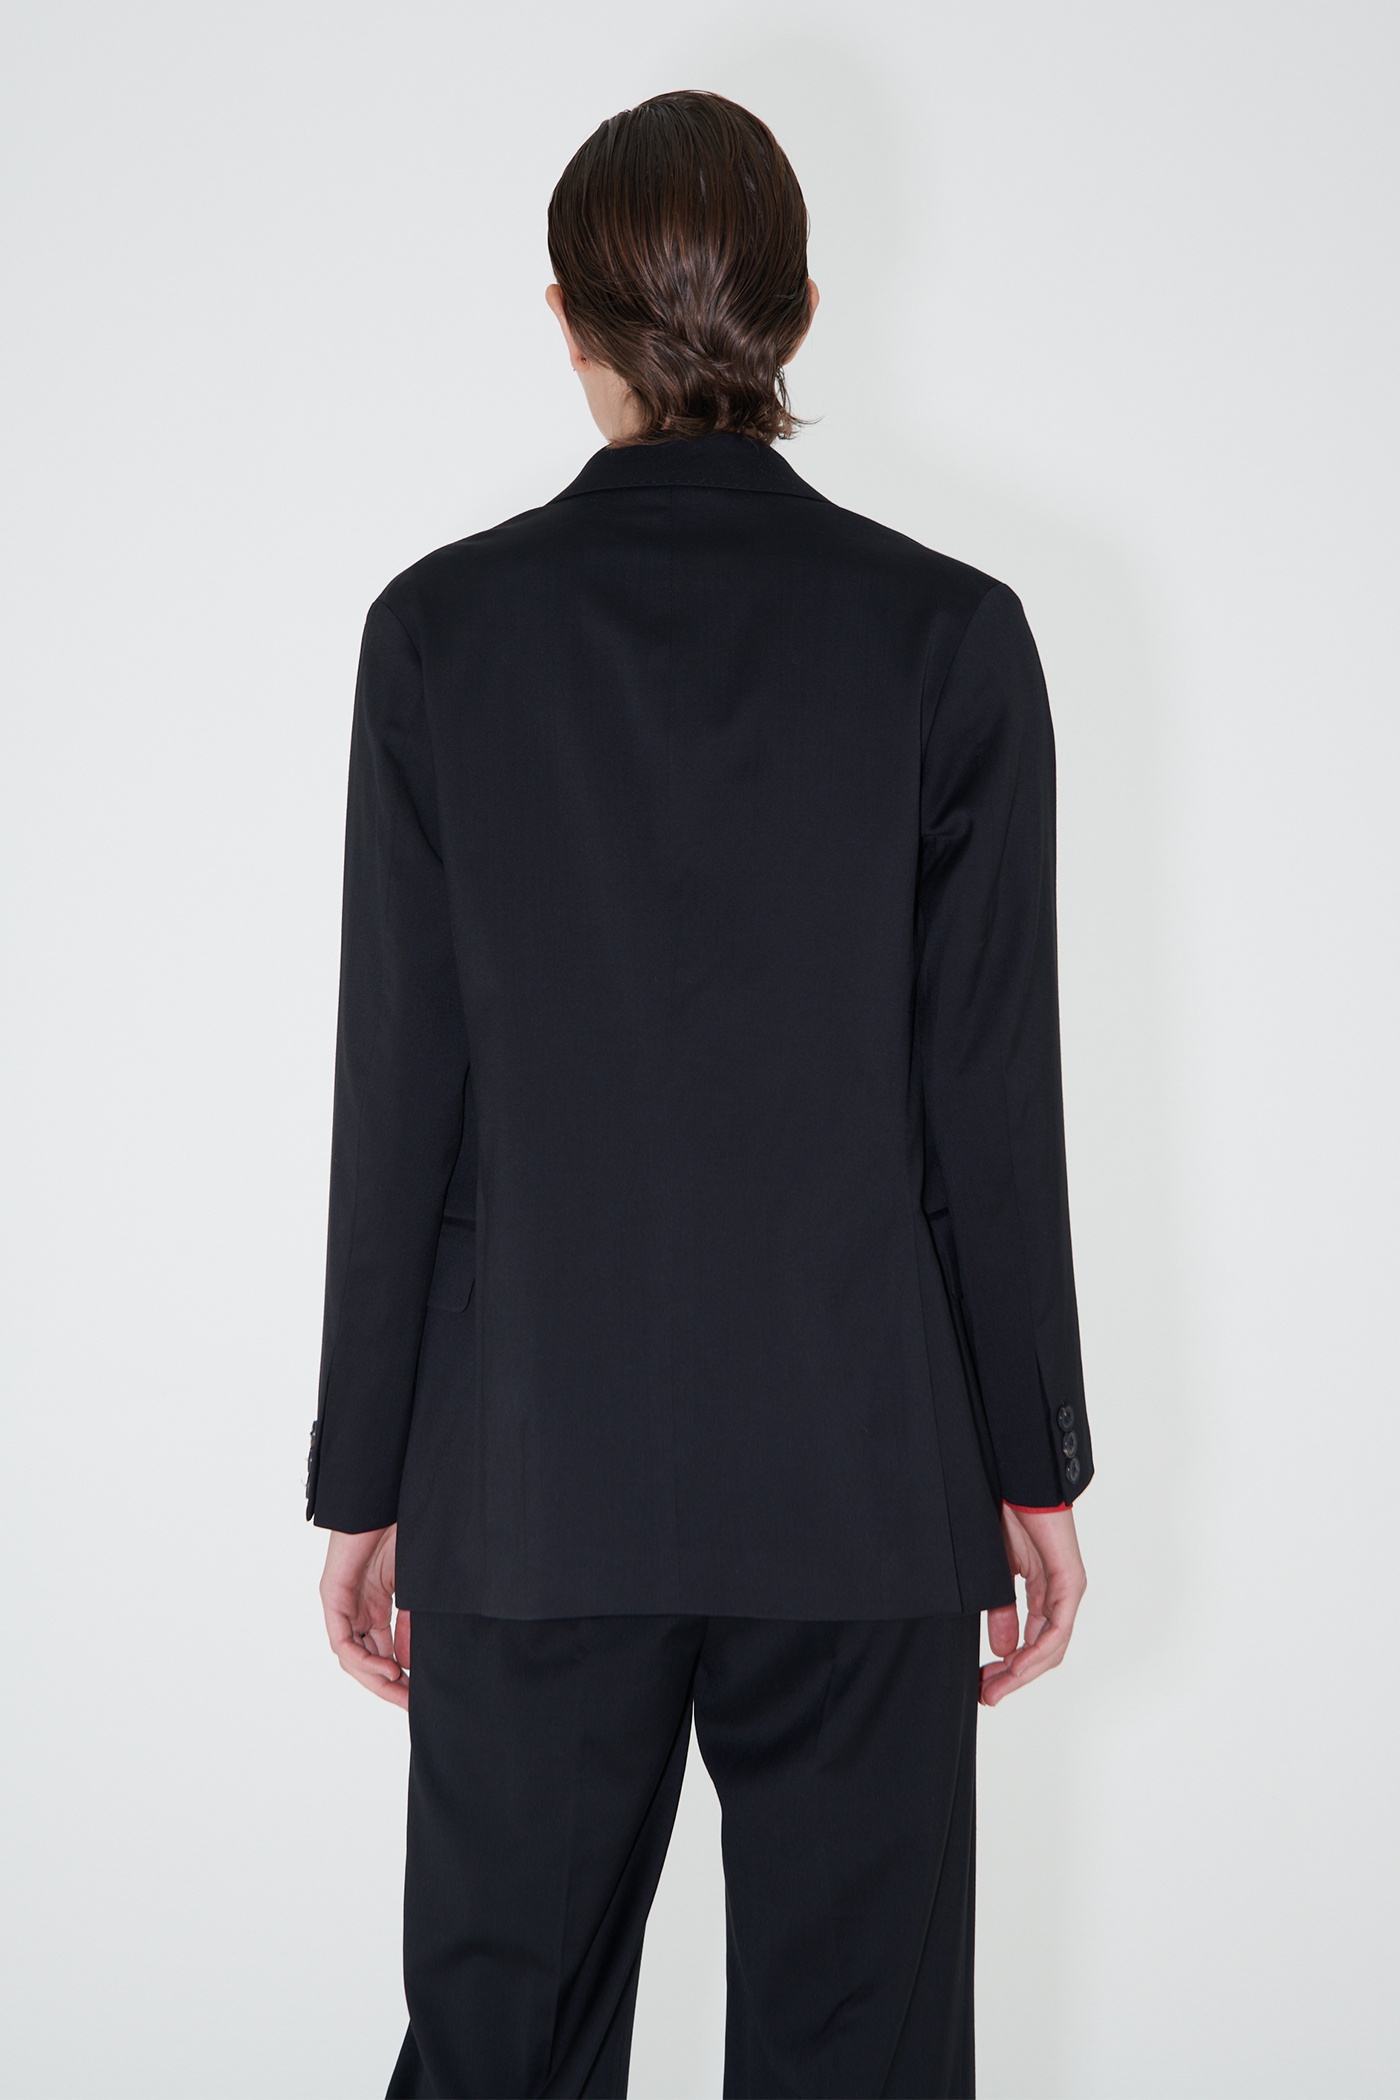 Unconstructed DB Blazer Black Worsted Wool - 4